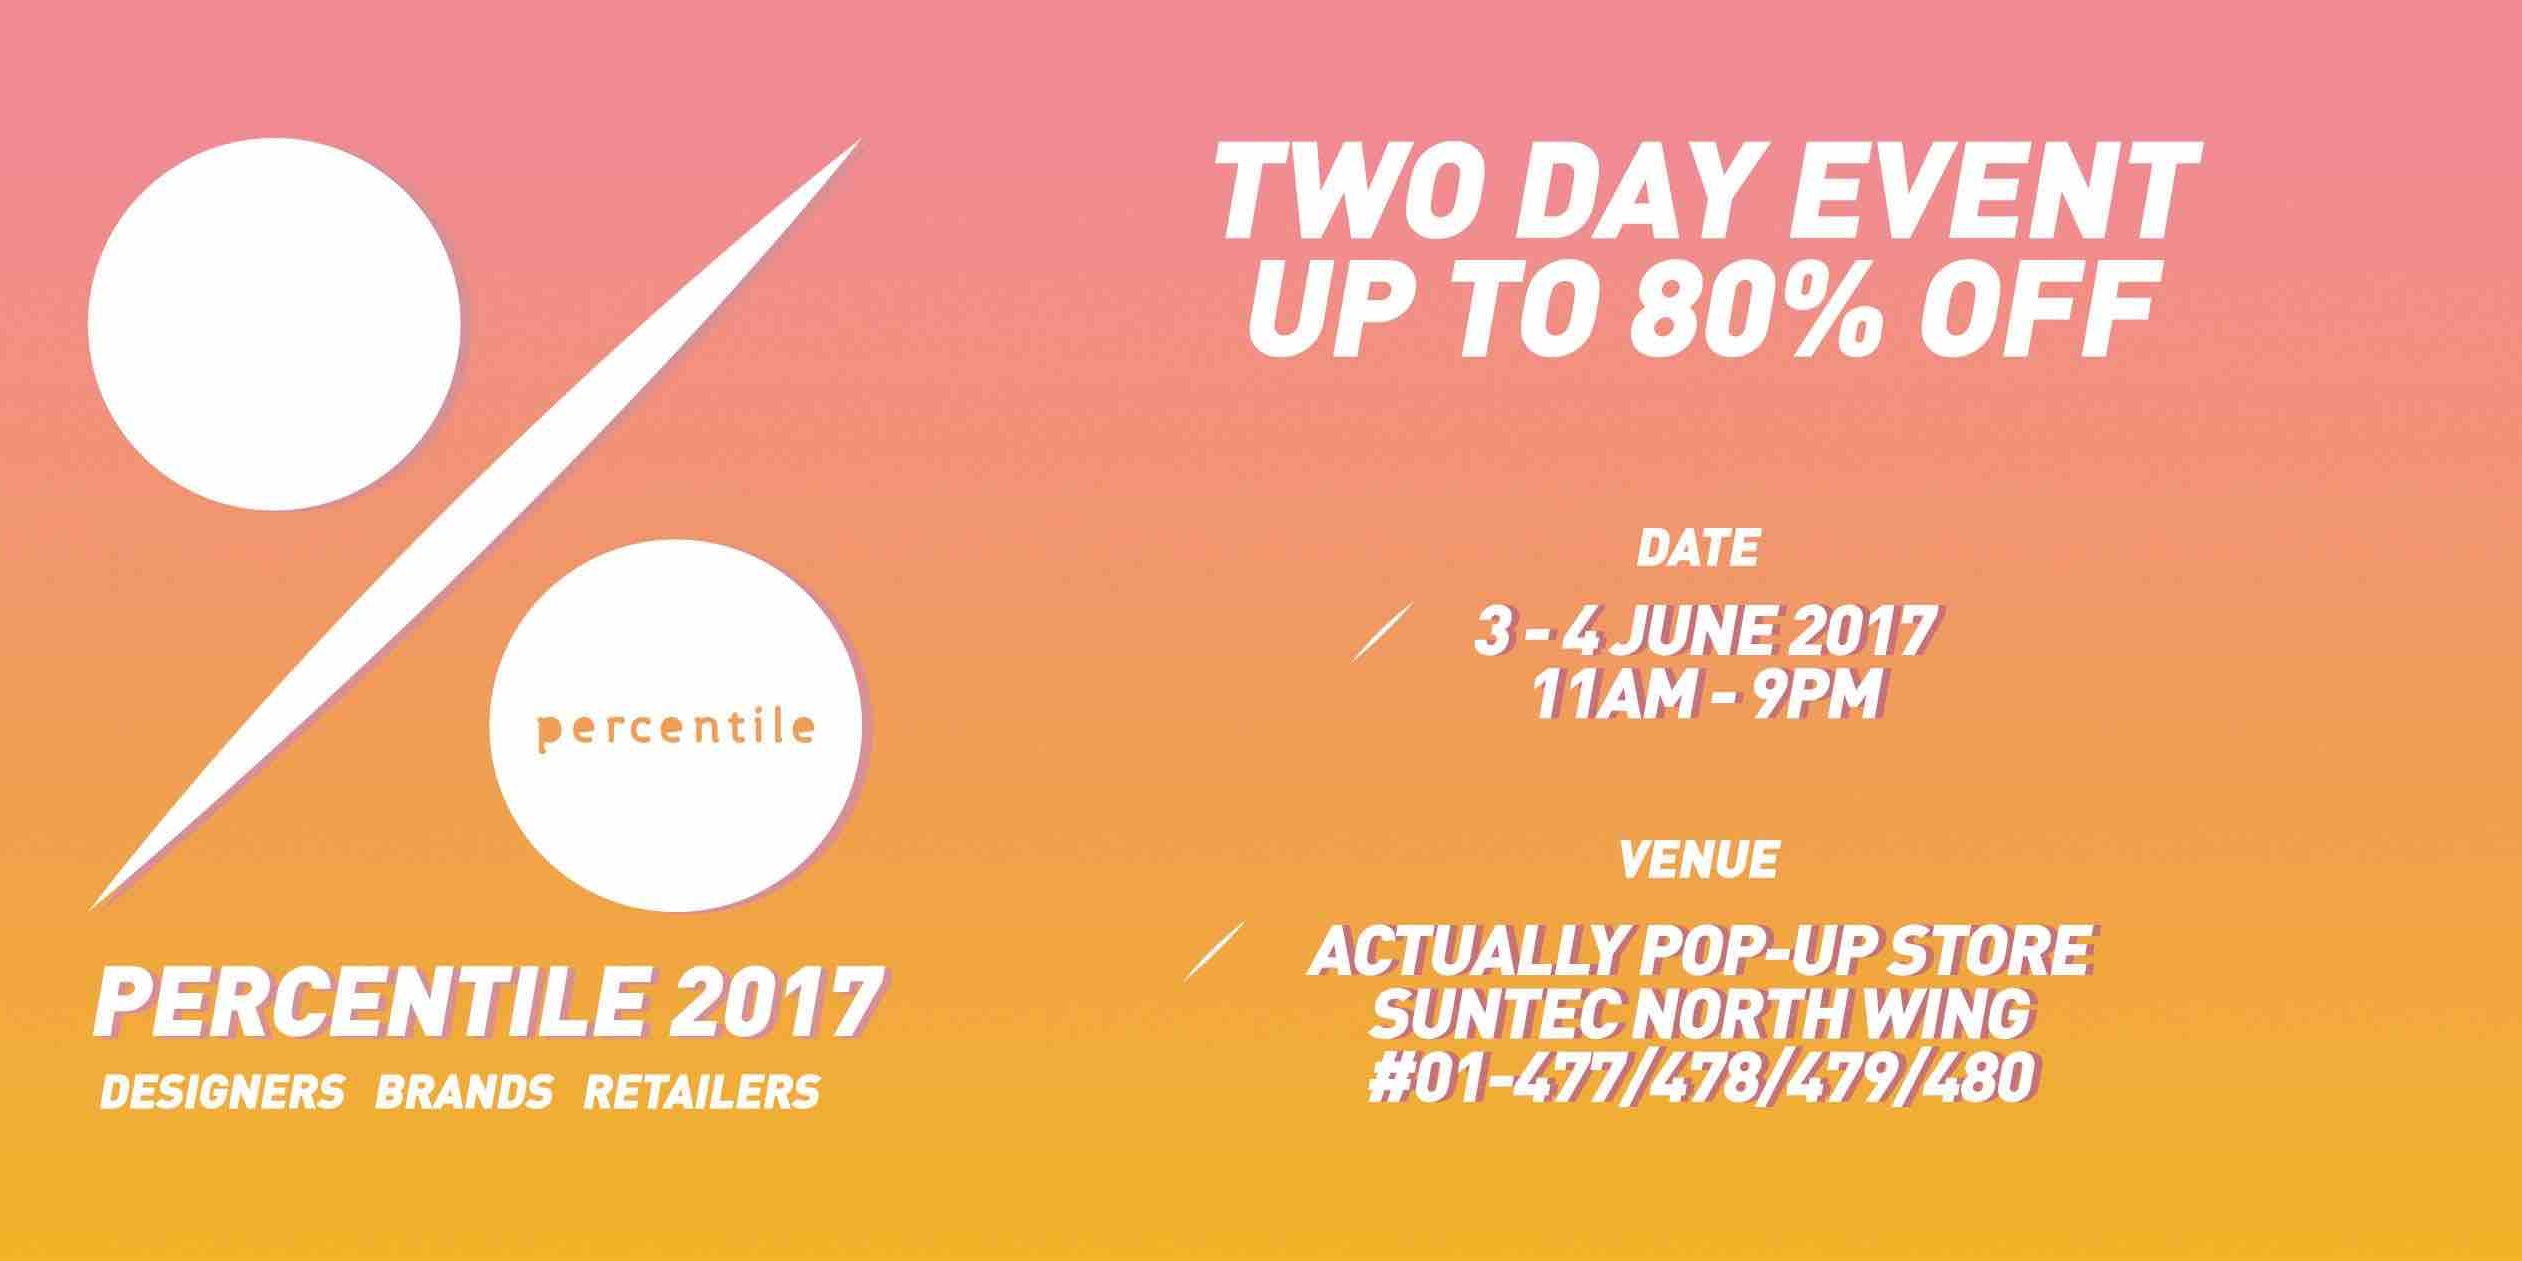 Percentile Singapore Two Day Event Up to 80% Off Promotion 3-4 Jun 2017